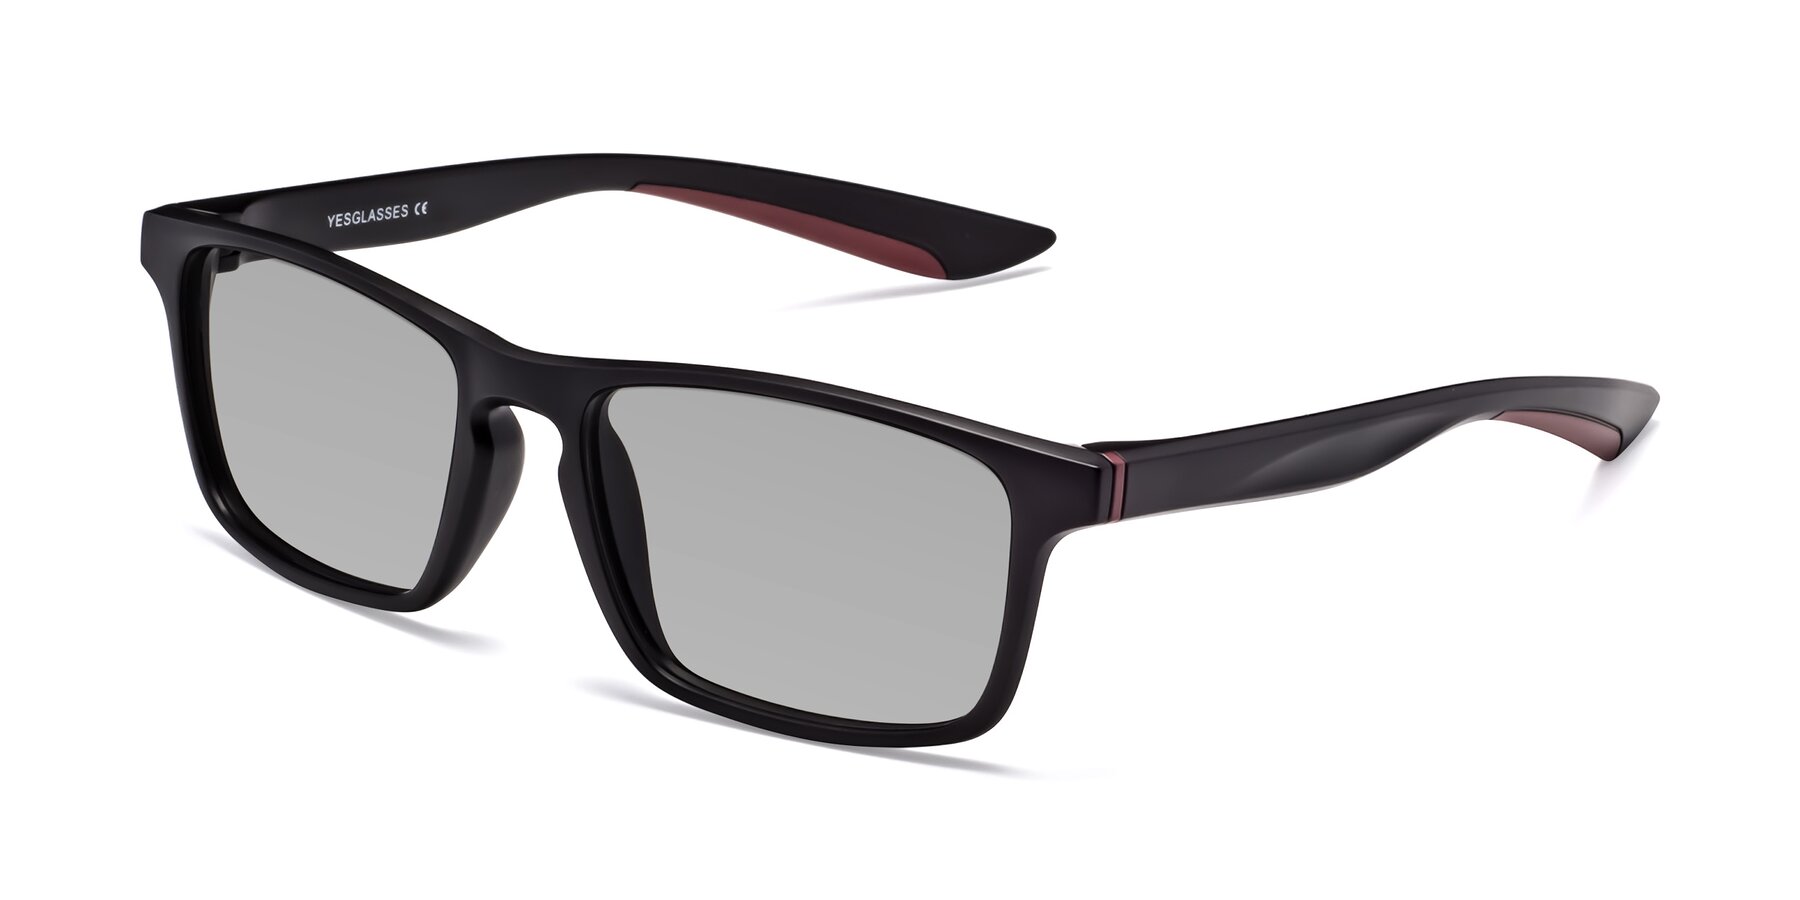 Angle of Passion in Matte Black-Wine with Light Gray Tinted Lenses